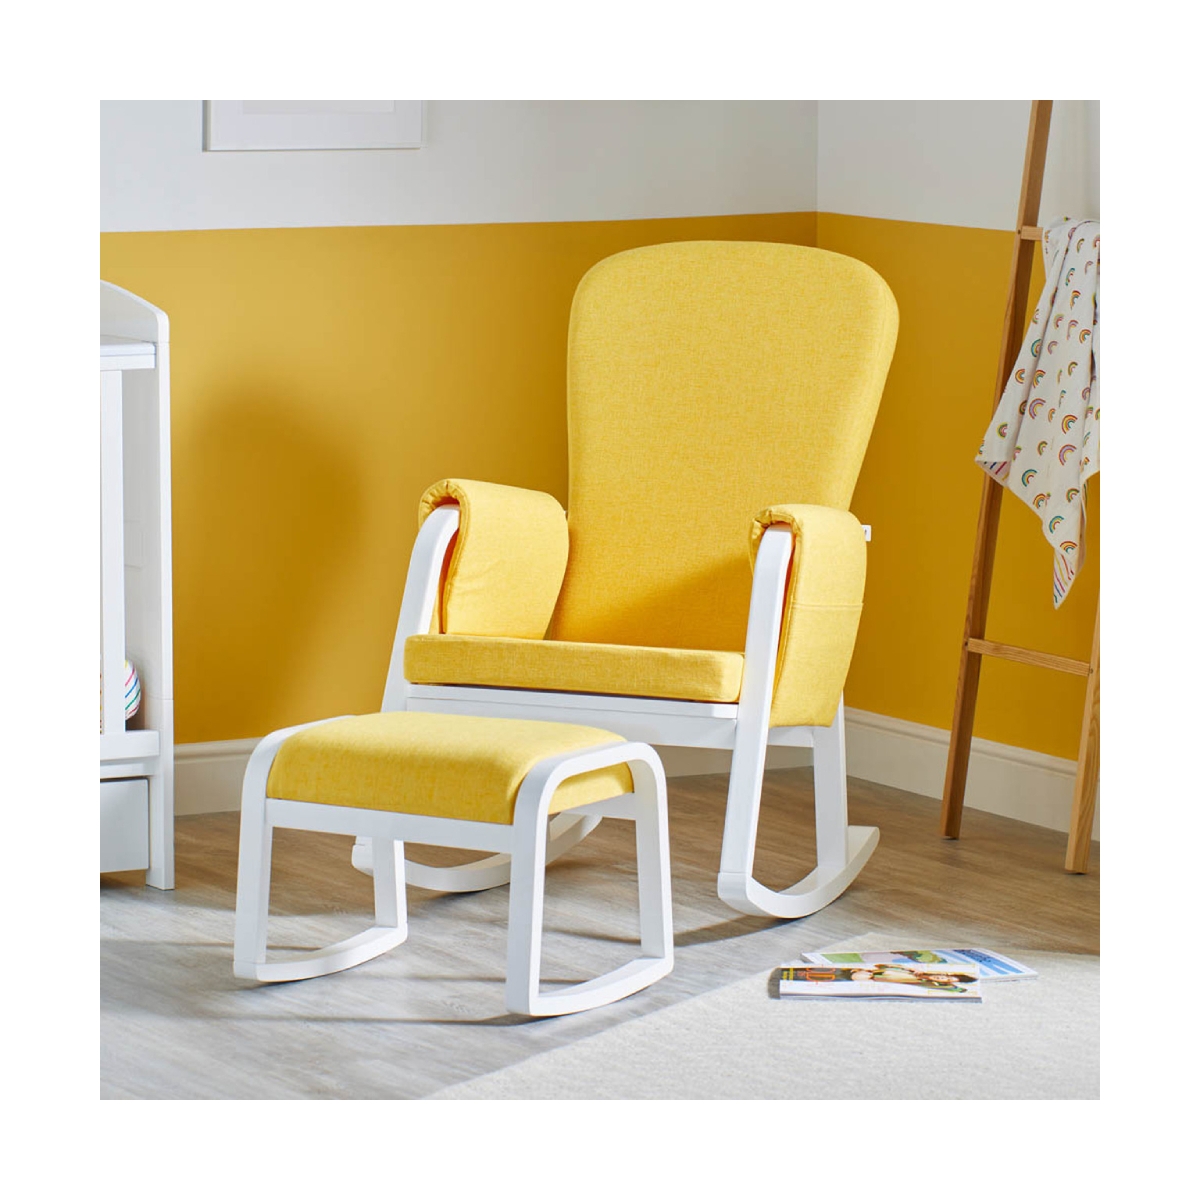 Ickle Bubba Dursley Rocker Chair and Stool